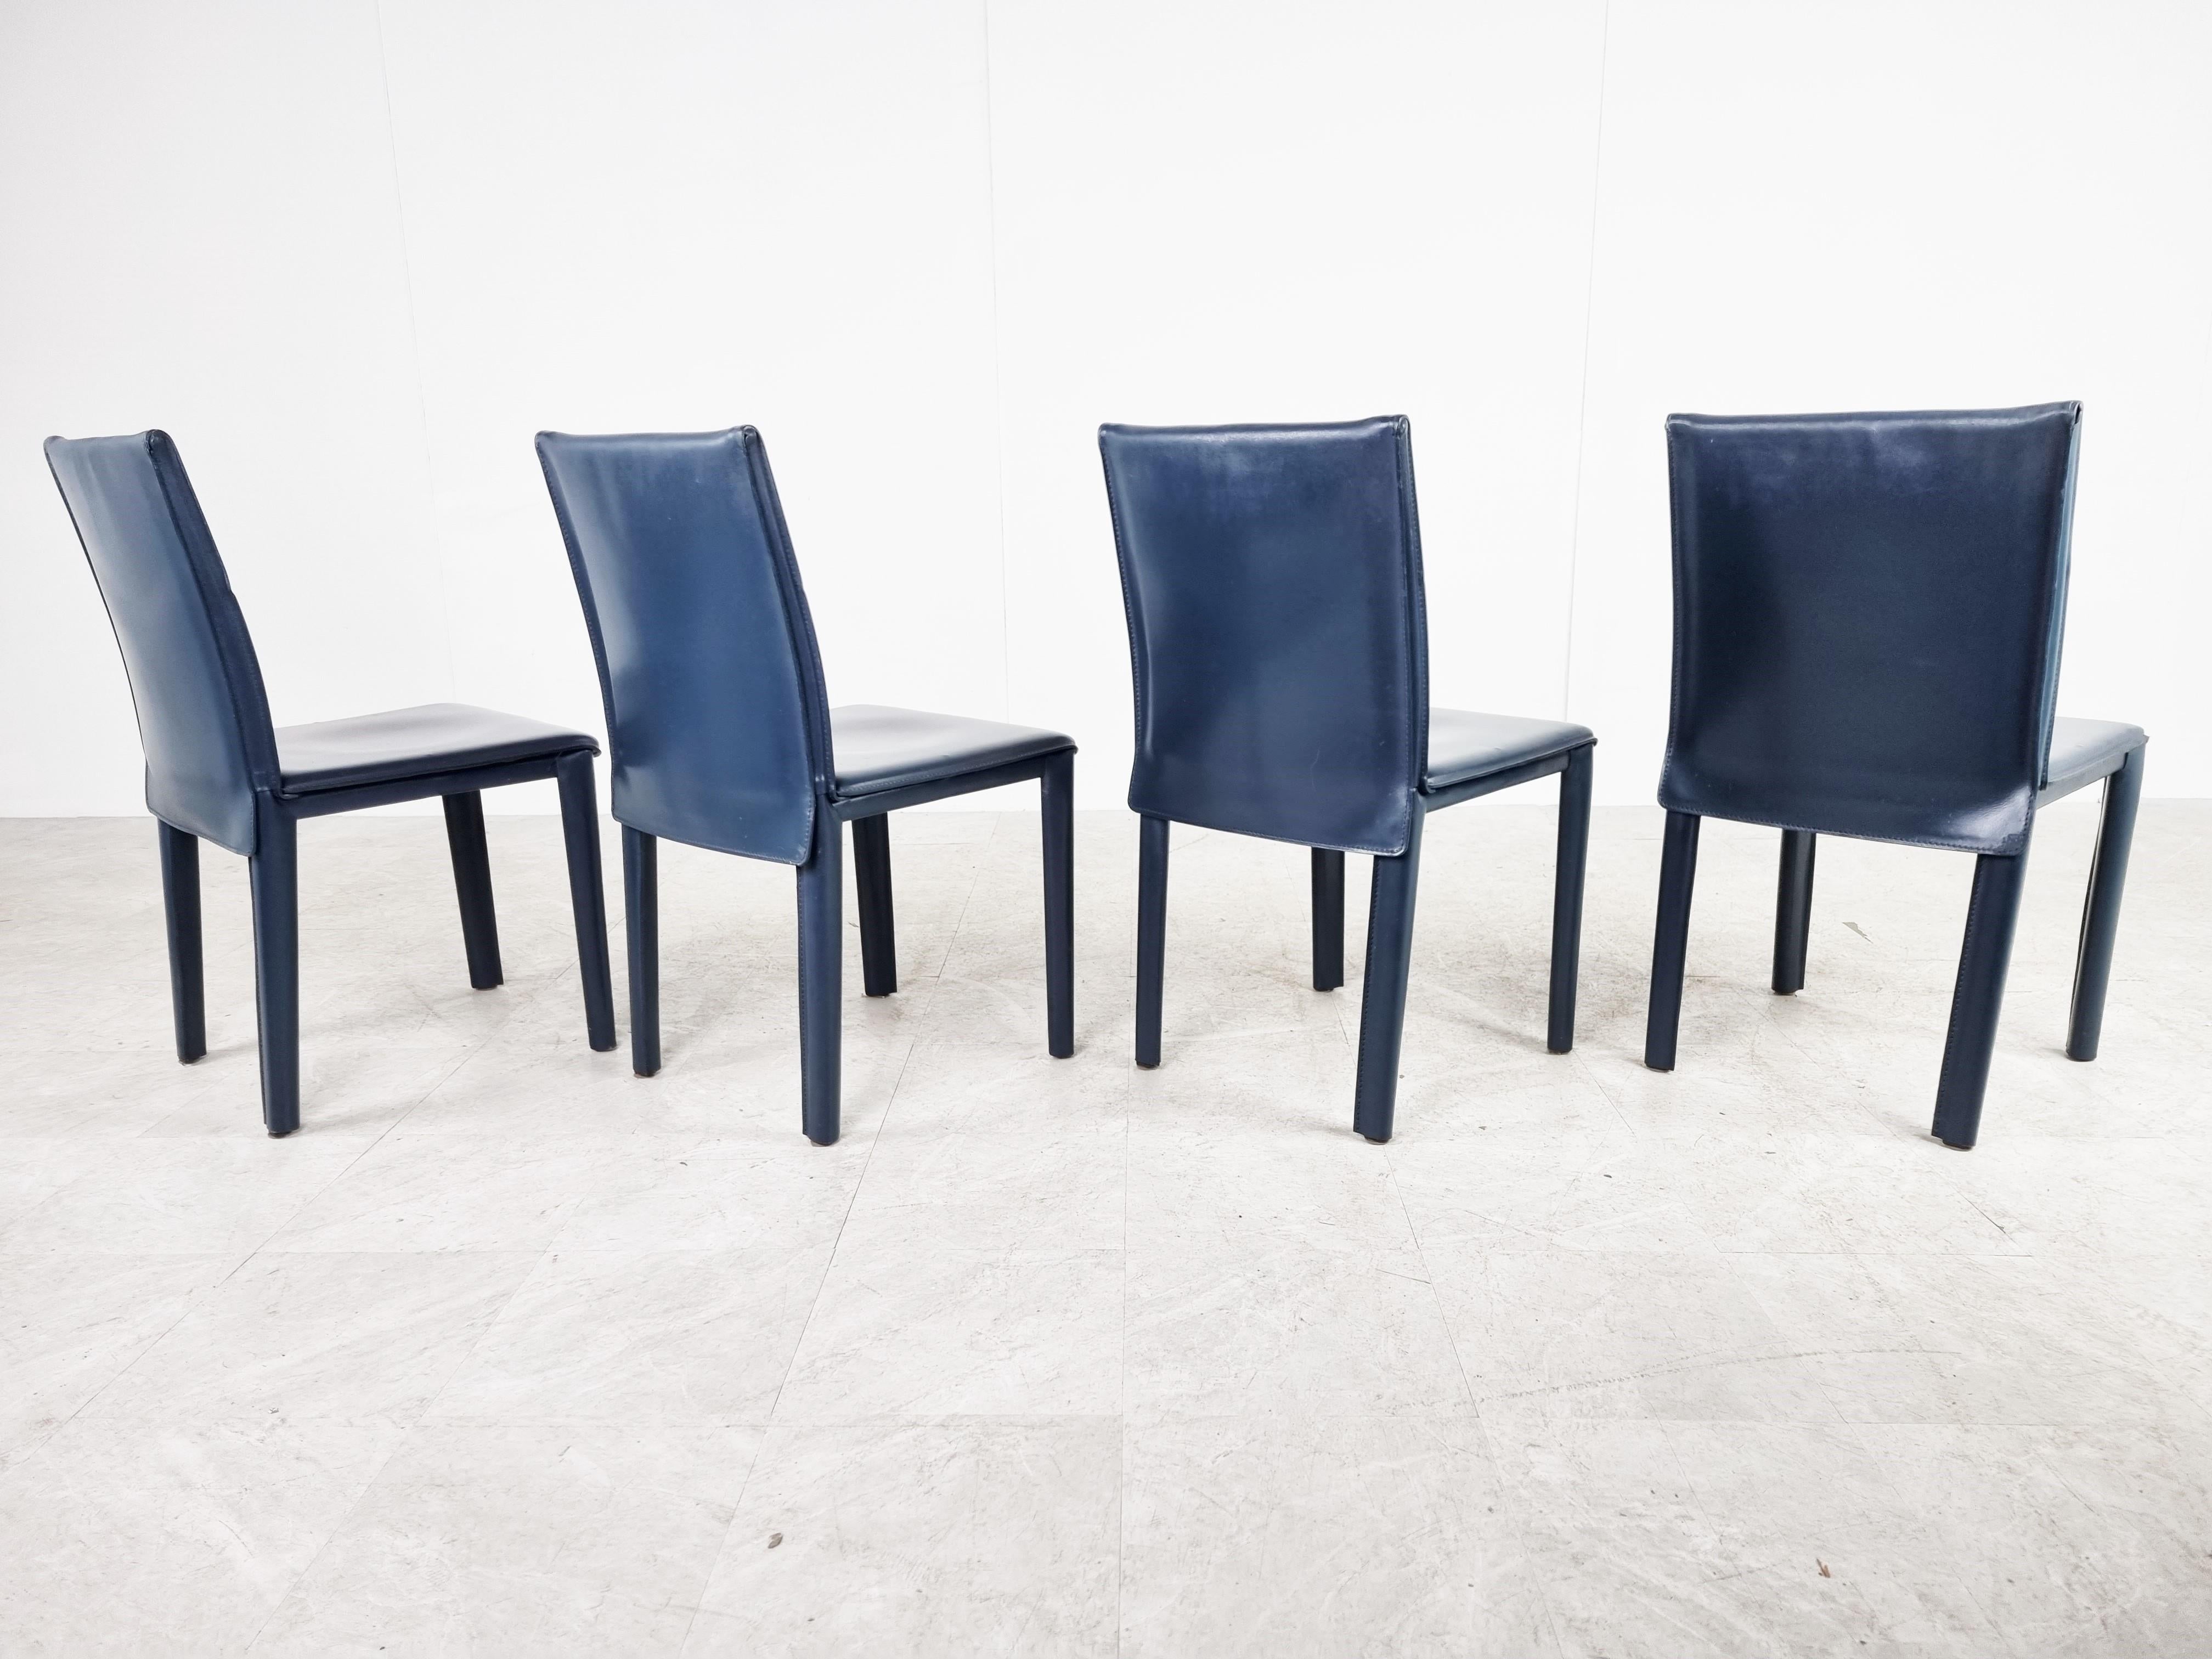 Italian Vintage Blue Leather Dining Chairs by Arper Italy, 1980s